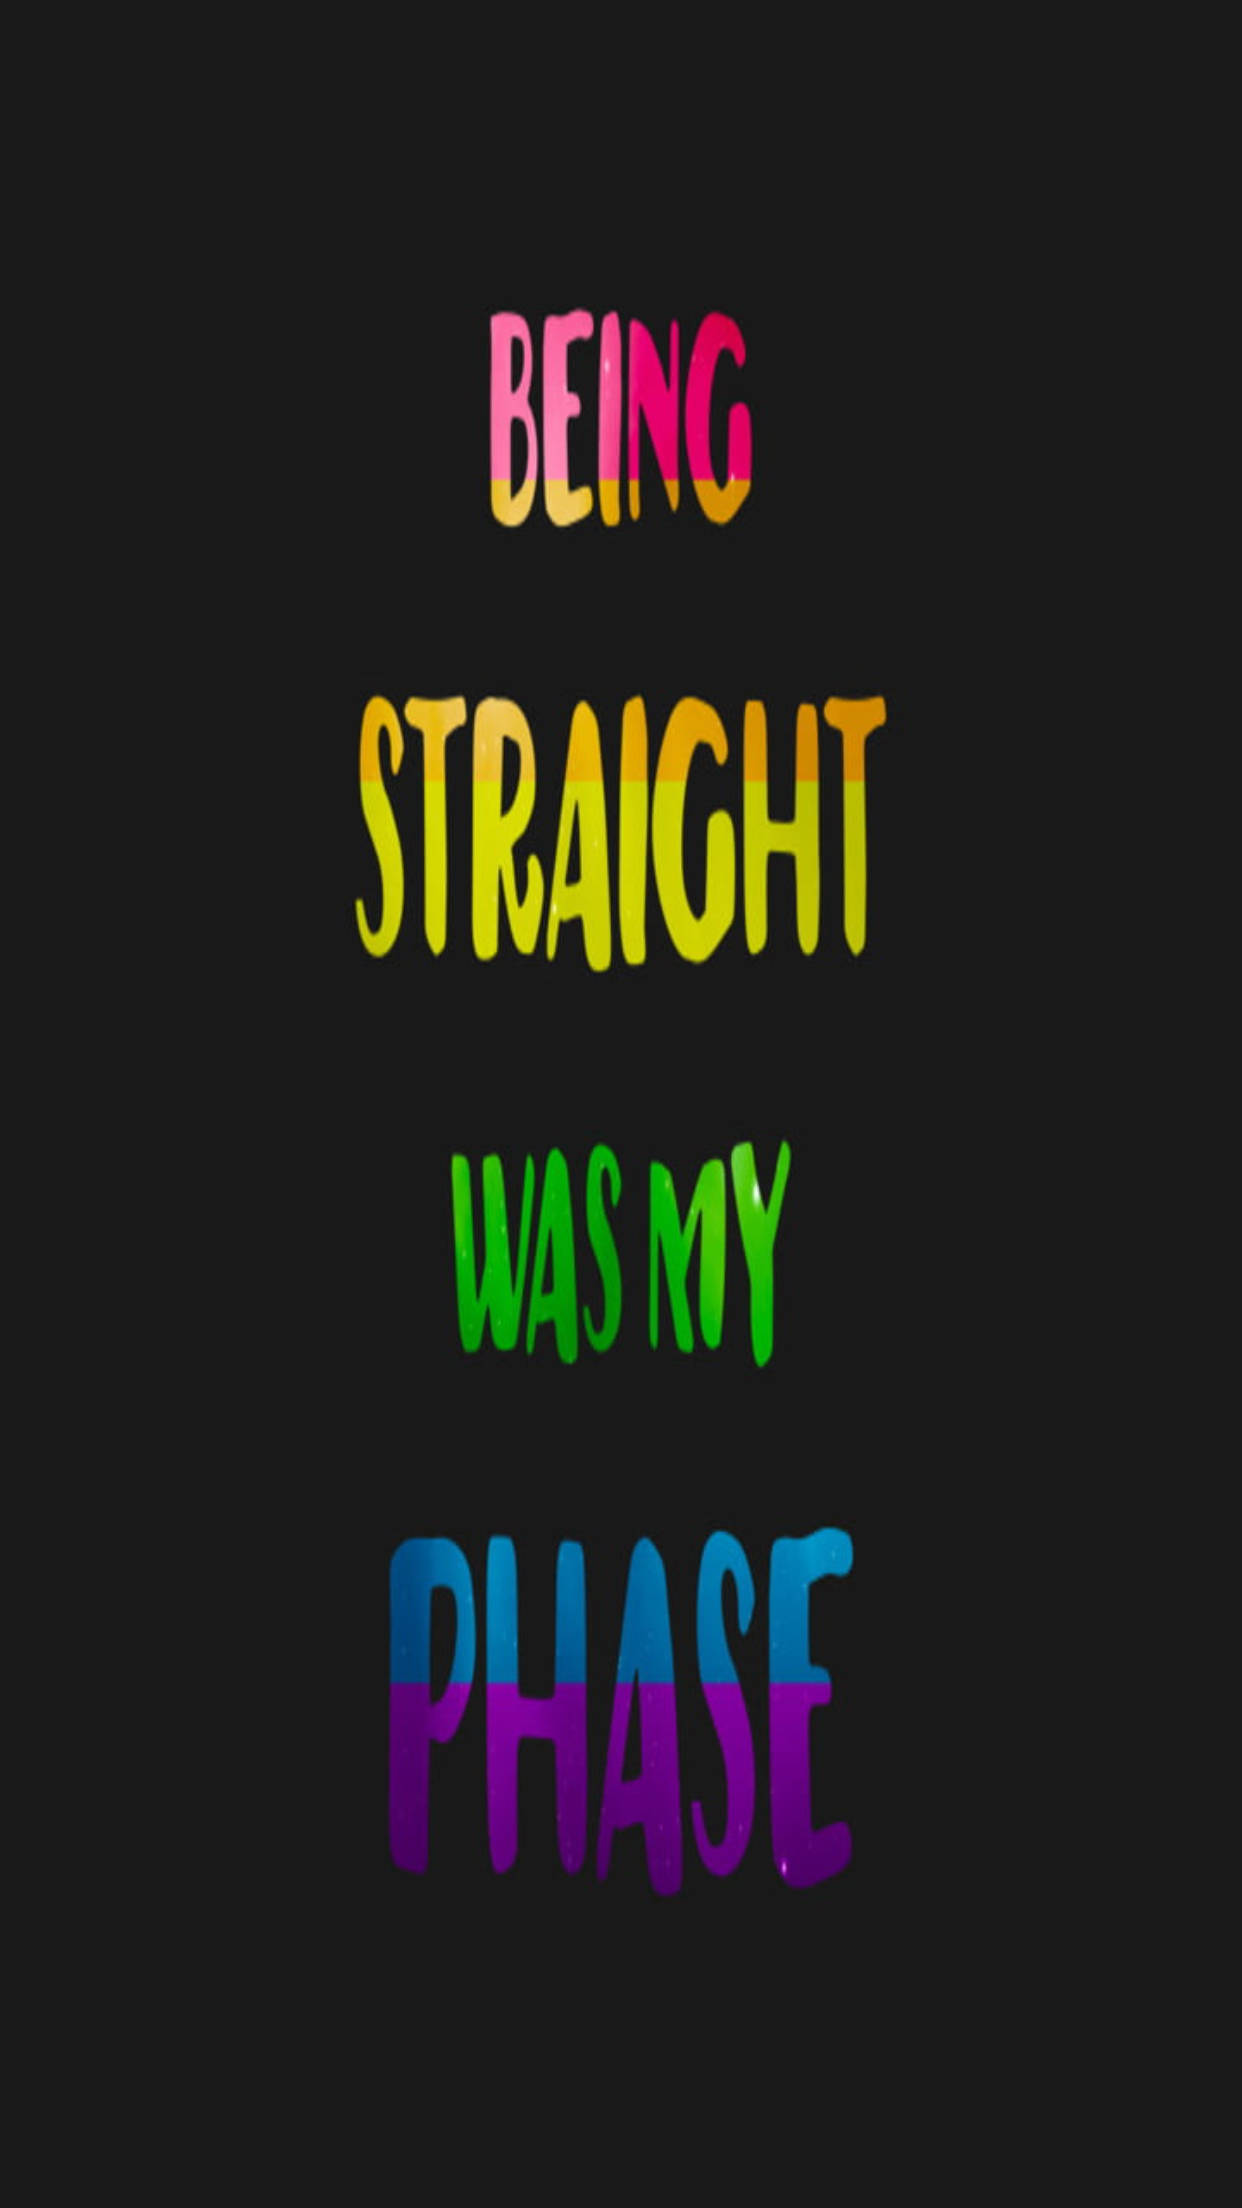 Straight Was My Phase Lgbt Phone Wallpaper